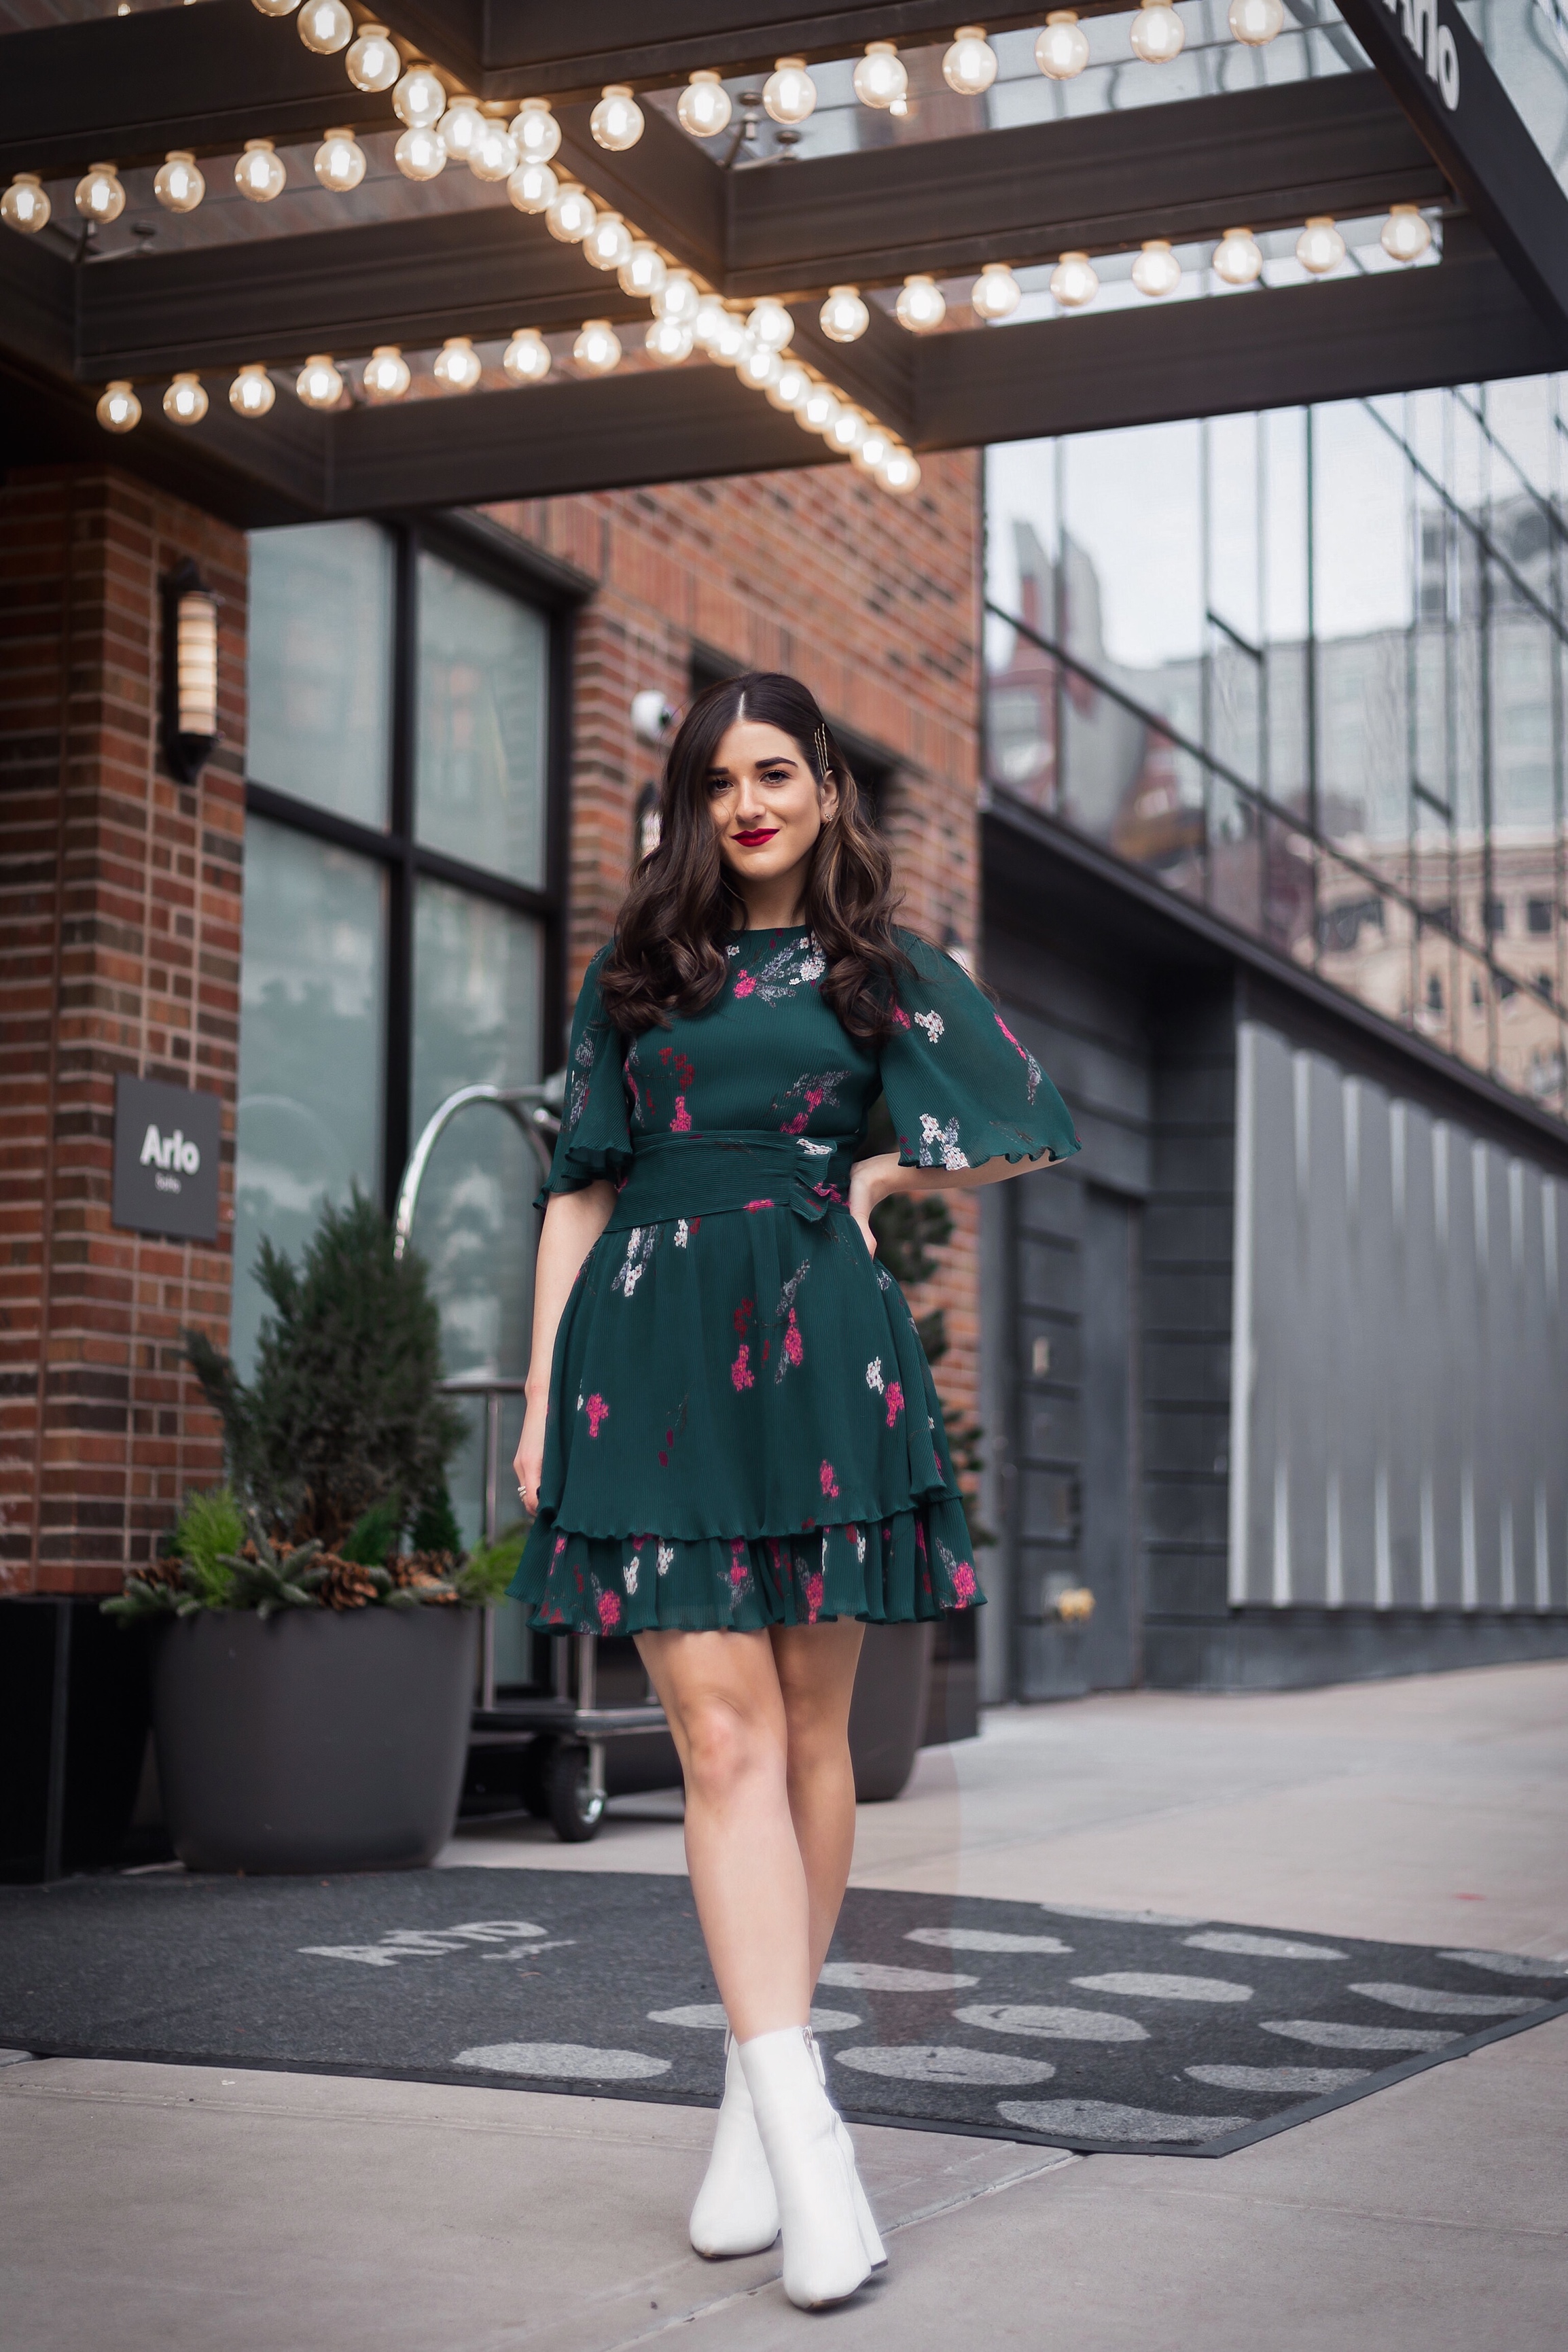 10 NYC Experiences Everyone Should Have Green Floral  Dress White Booties Esther Santer Fashion Blog NYC Street Style Blogger Outfit OOTD Trendy Shopping Girl What How To Wear Bobby Pins Hairstyle Fall Look Butterfly Sleeves Keepsake Label Arlo Soho.JPG